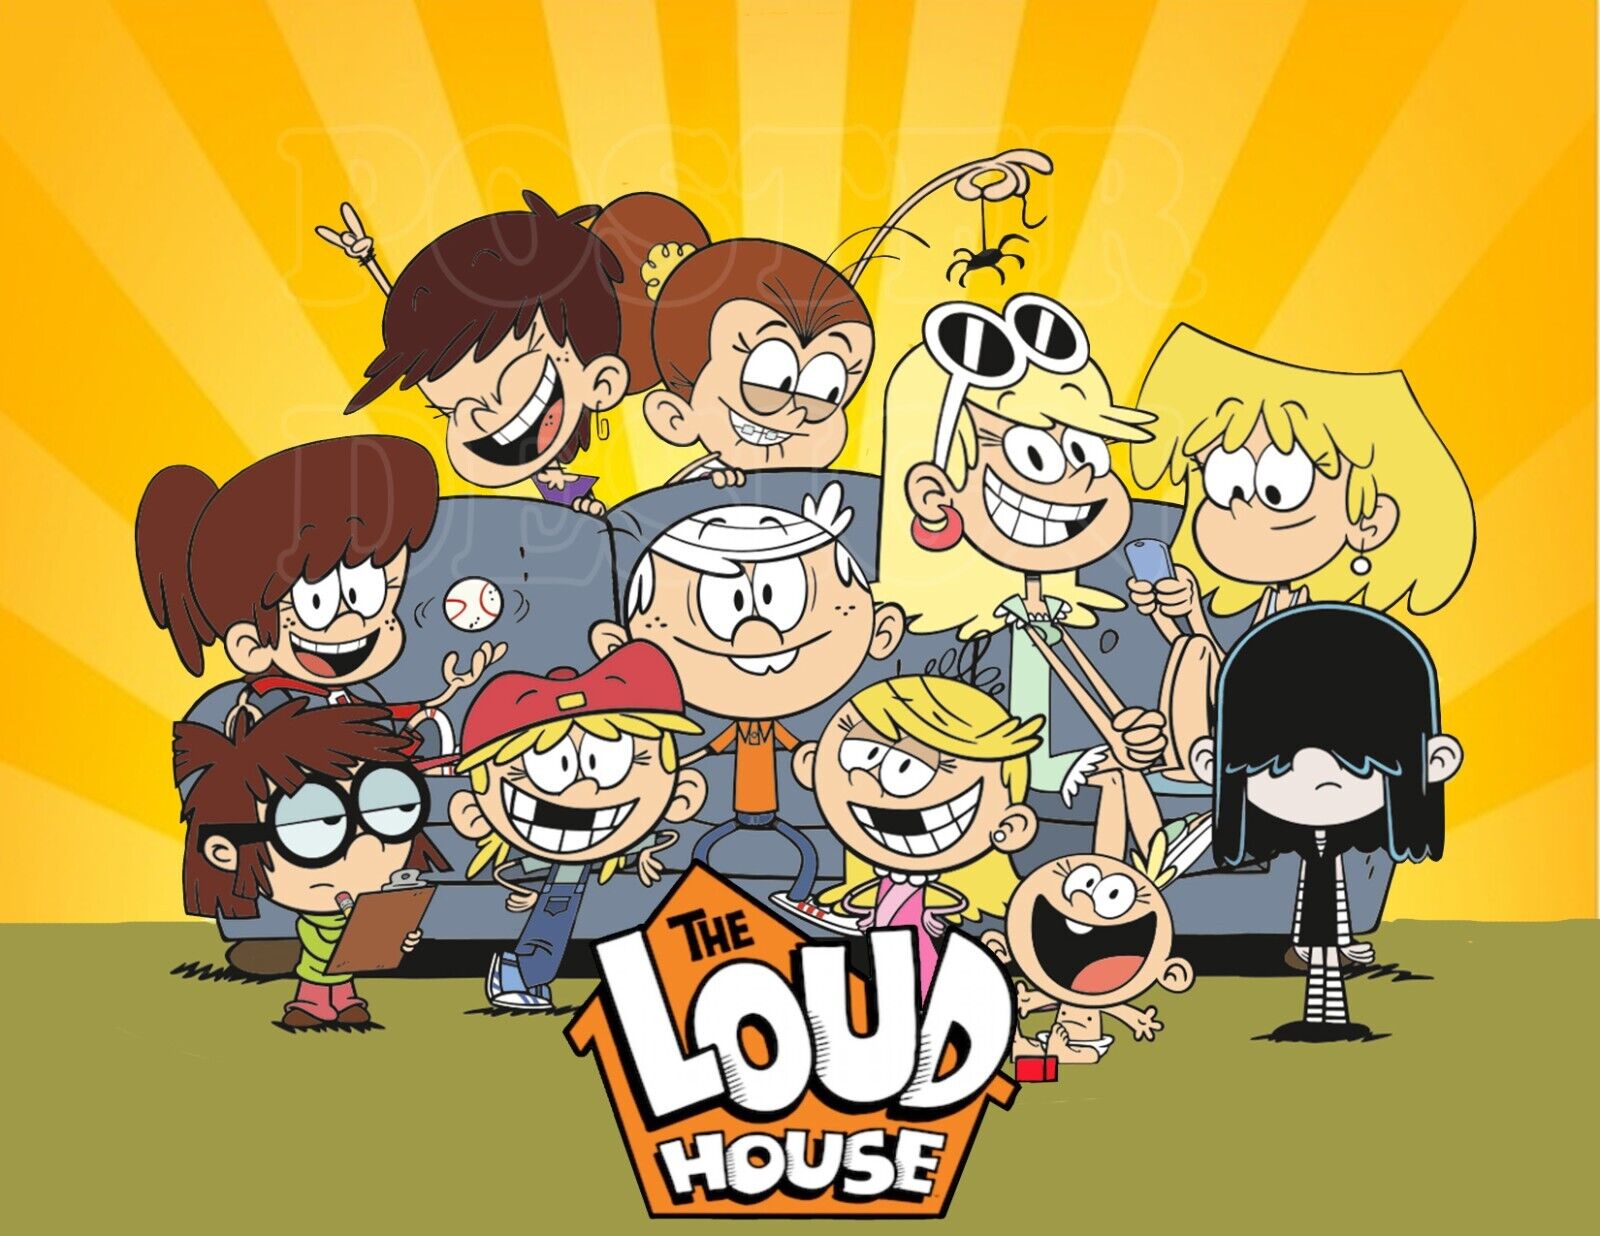 angel villicana recommends loud house pictures pic